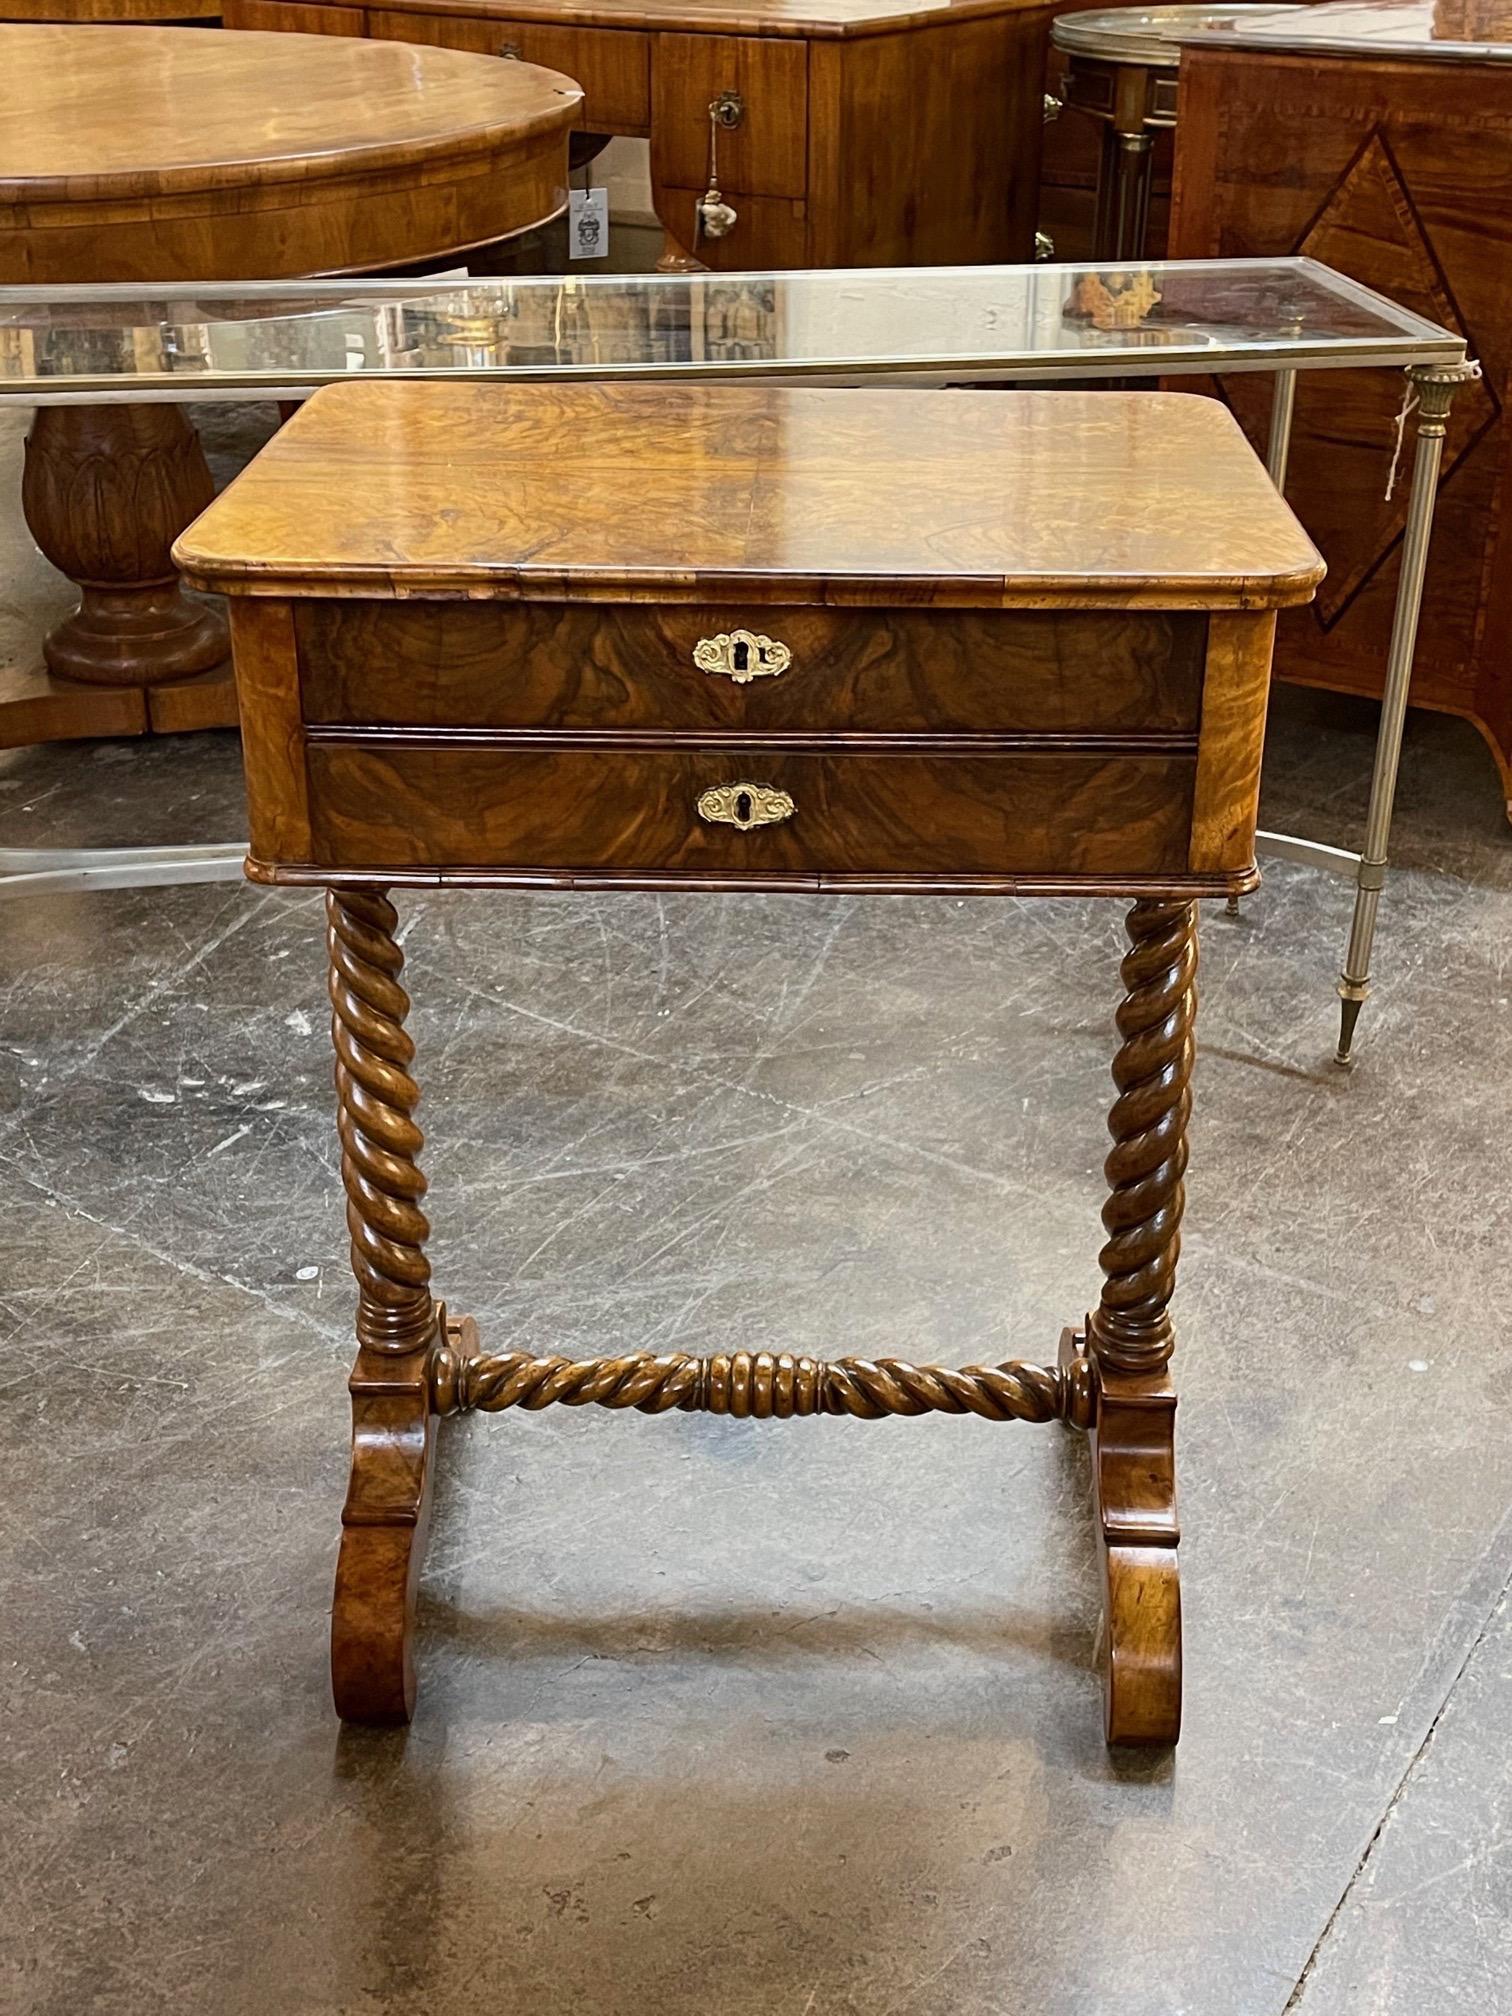 Very nice 19th century English burl walnut 2 drawer side table with barley twist legs. Beautiful finish on this piece! A great addition for a fine home.